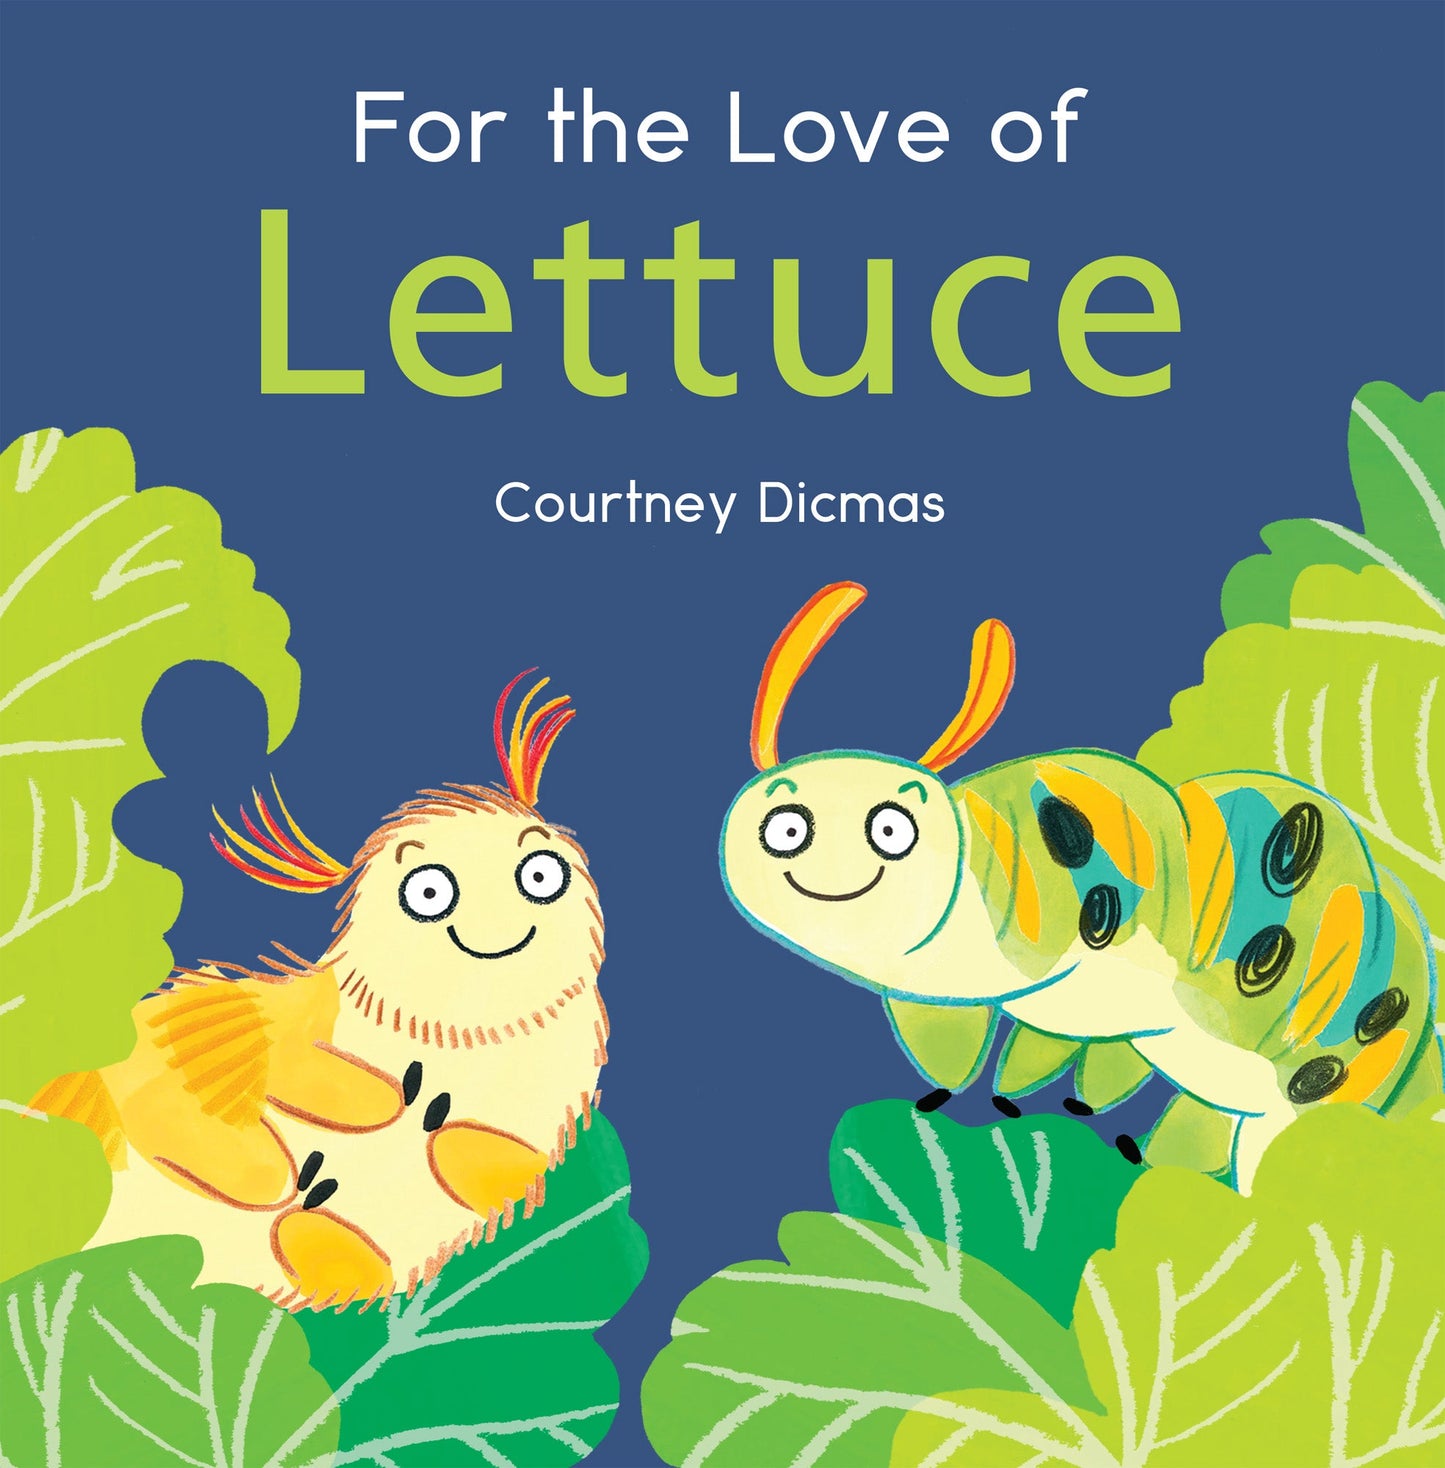 For the Love of Lettuce (Hardcover Edition)